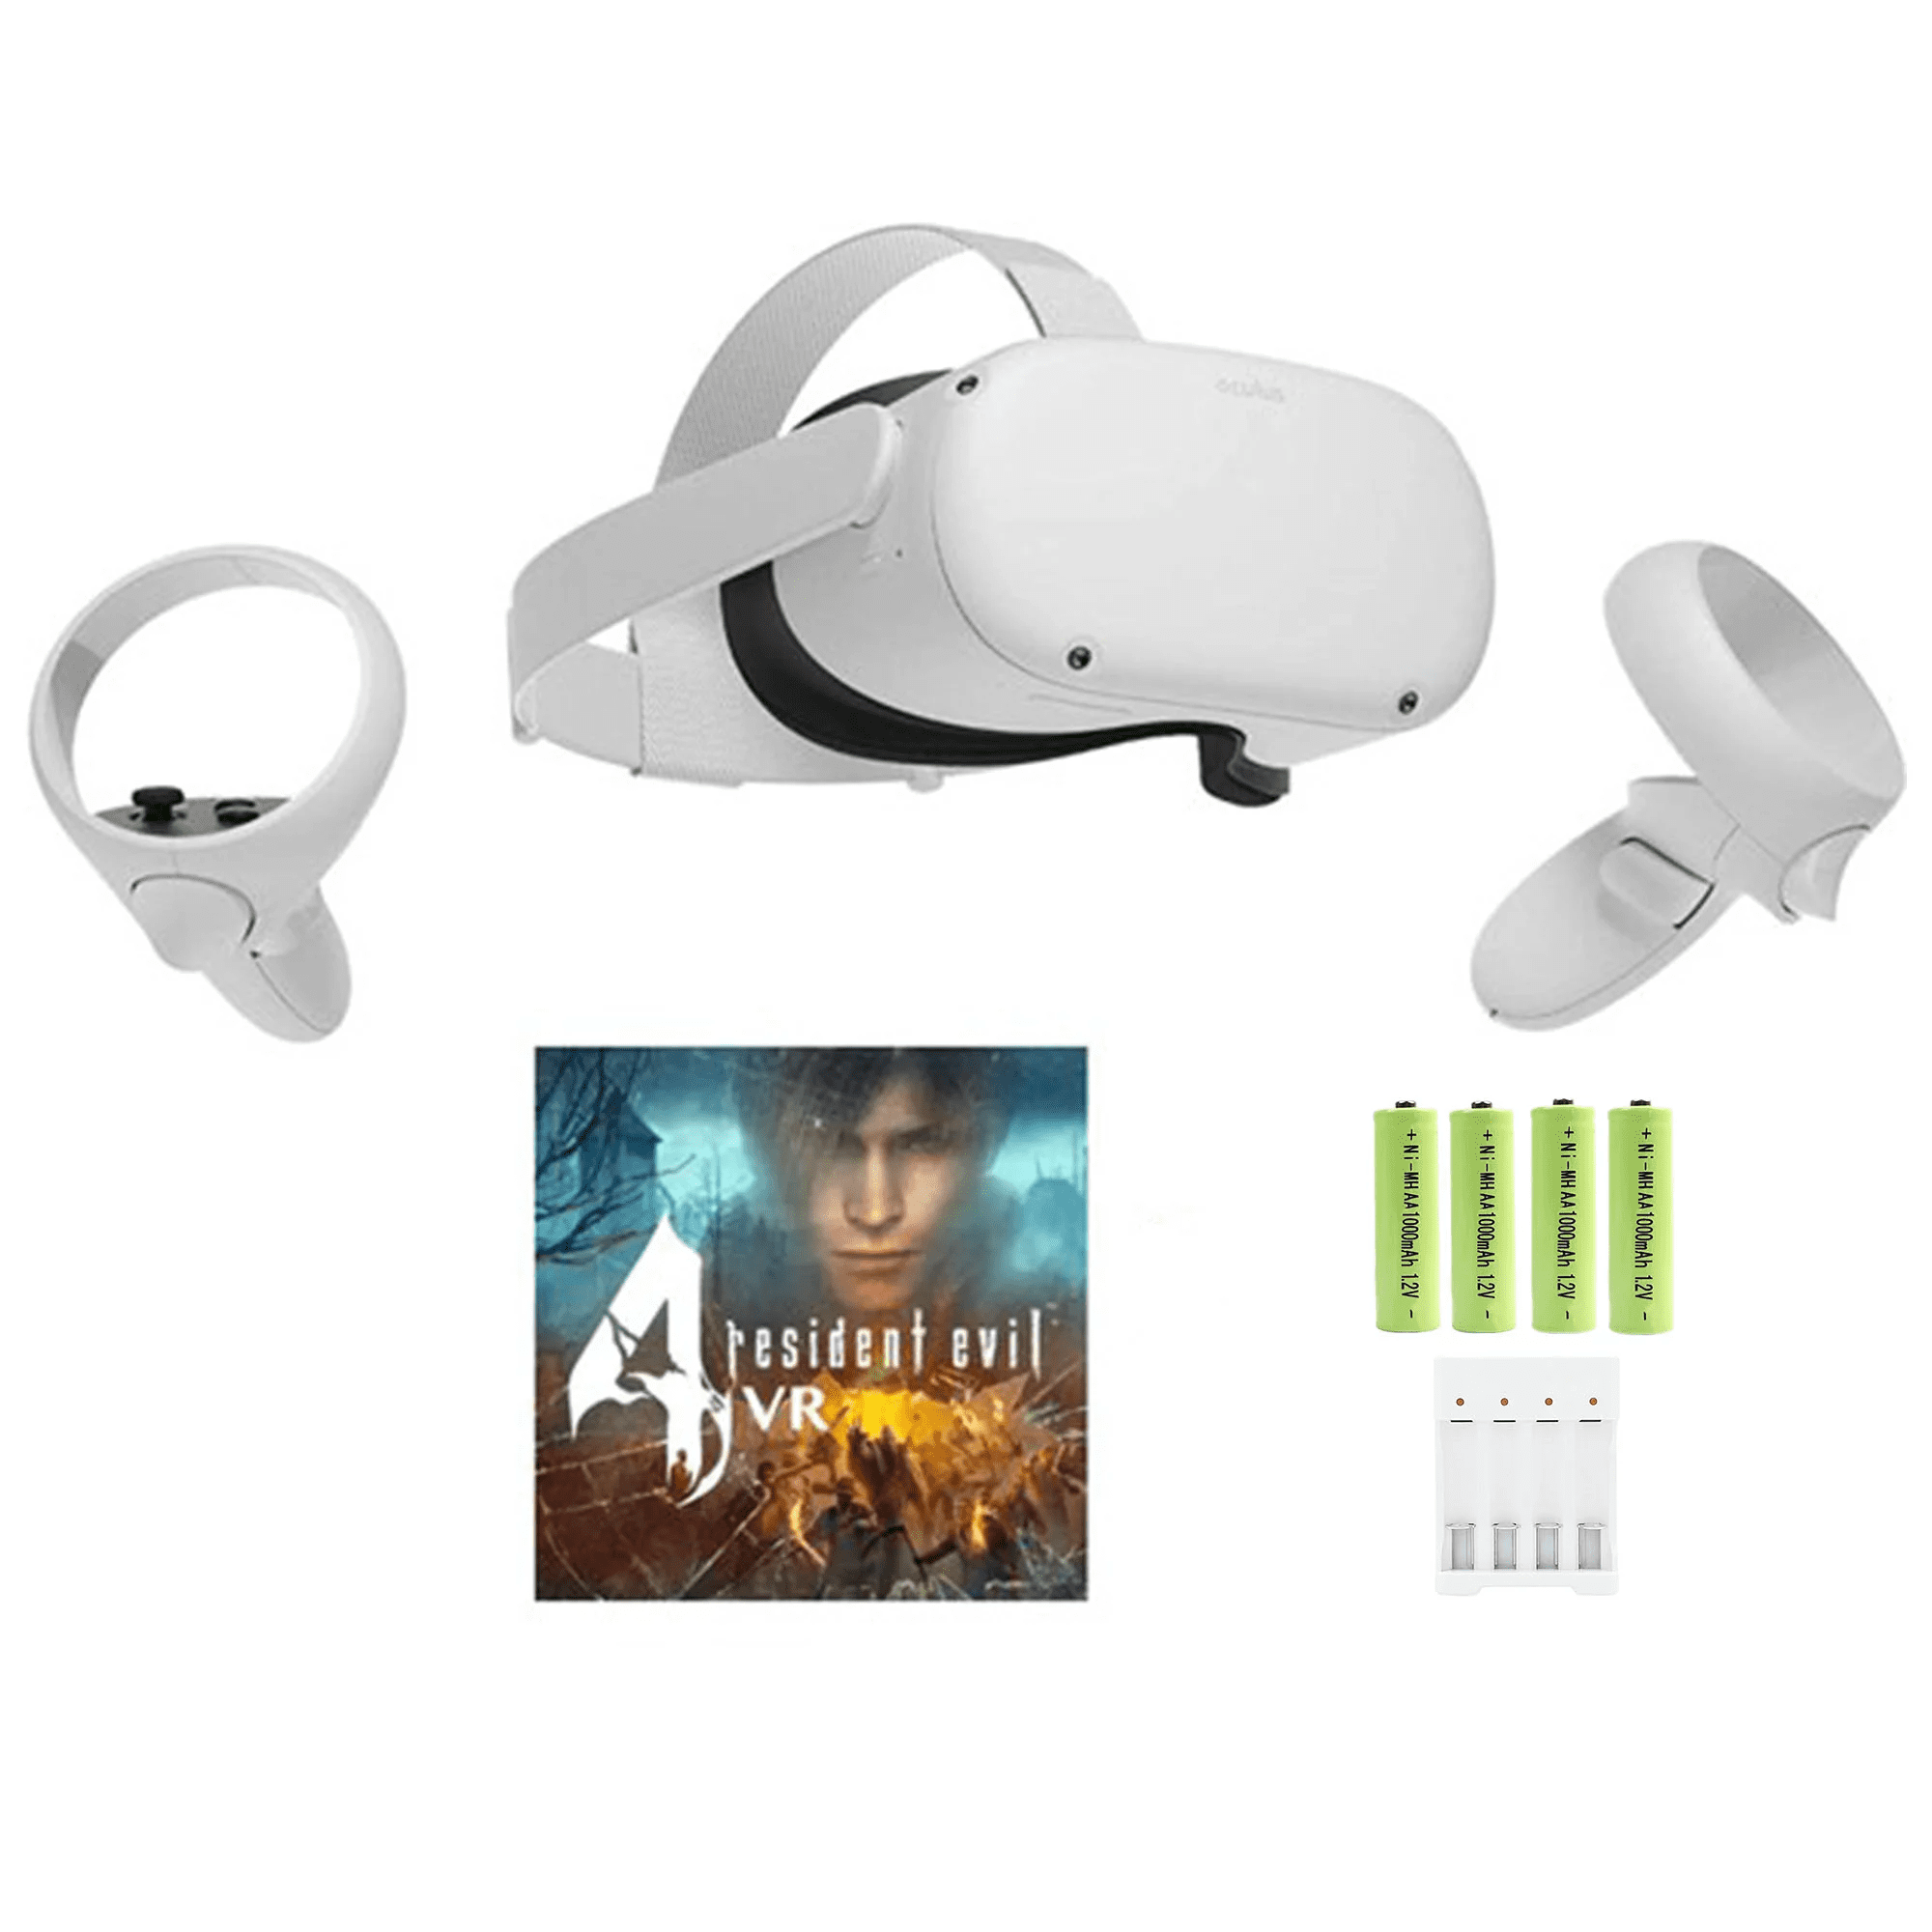 Meta Quest (Oculus) Advanced All-In-One Virtual Reality Headset 256 GB  with Resident Evil 4, Touch Controllers, w/4 AA Rechargeable Batteries and  Charger Accessories Set